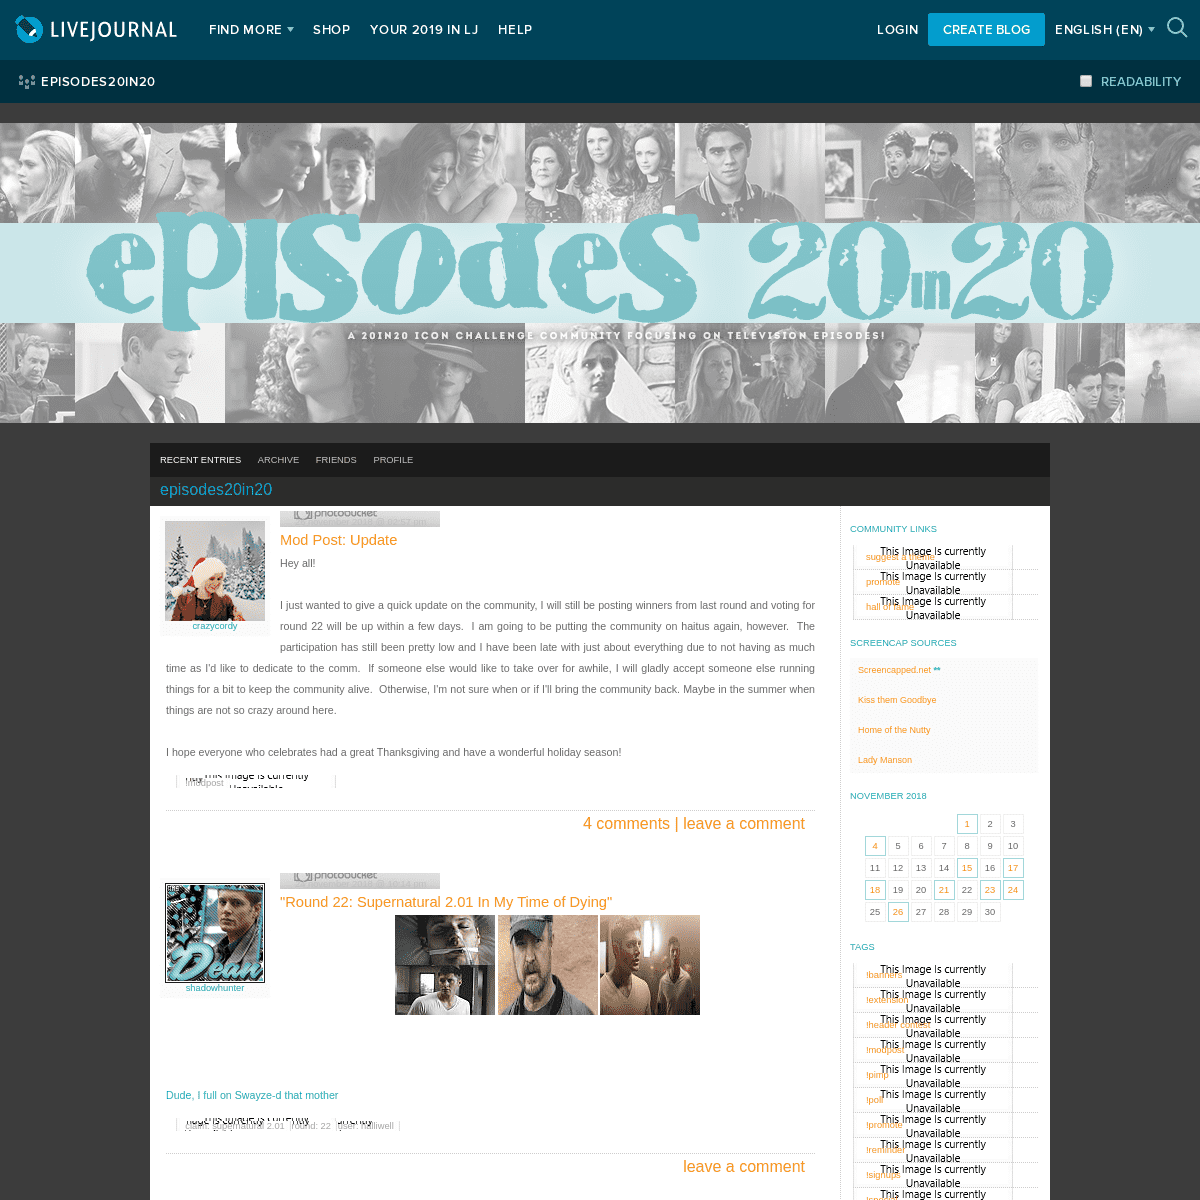 A complete backup of episodes20in20.livejournal.com